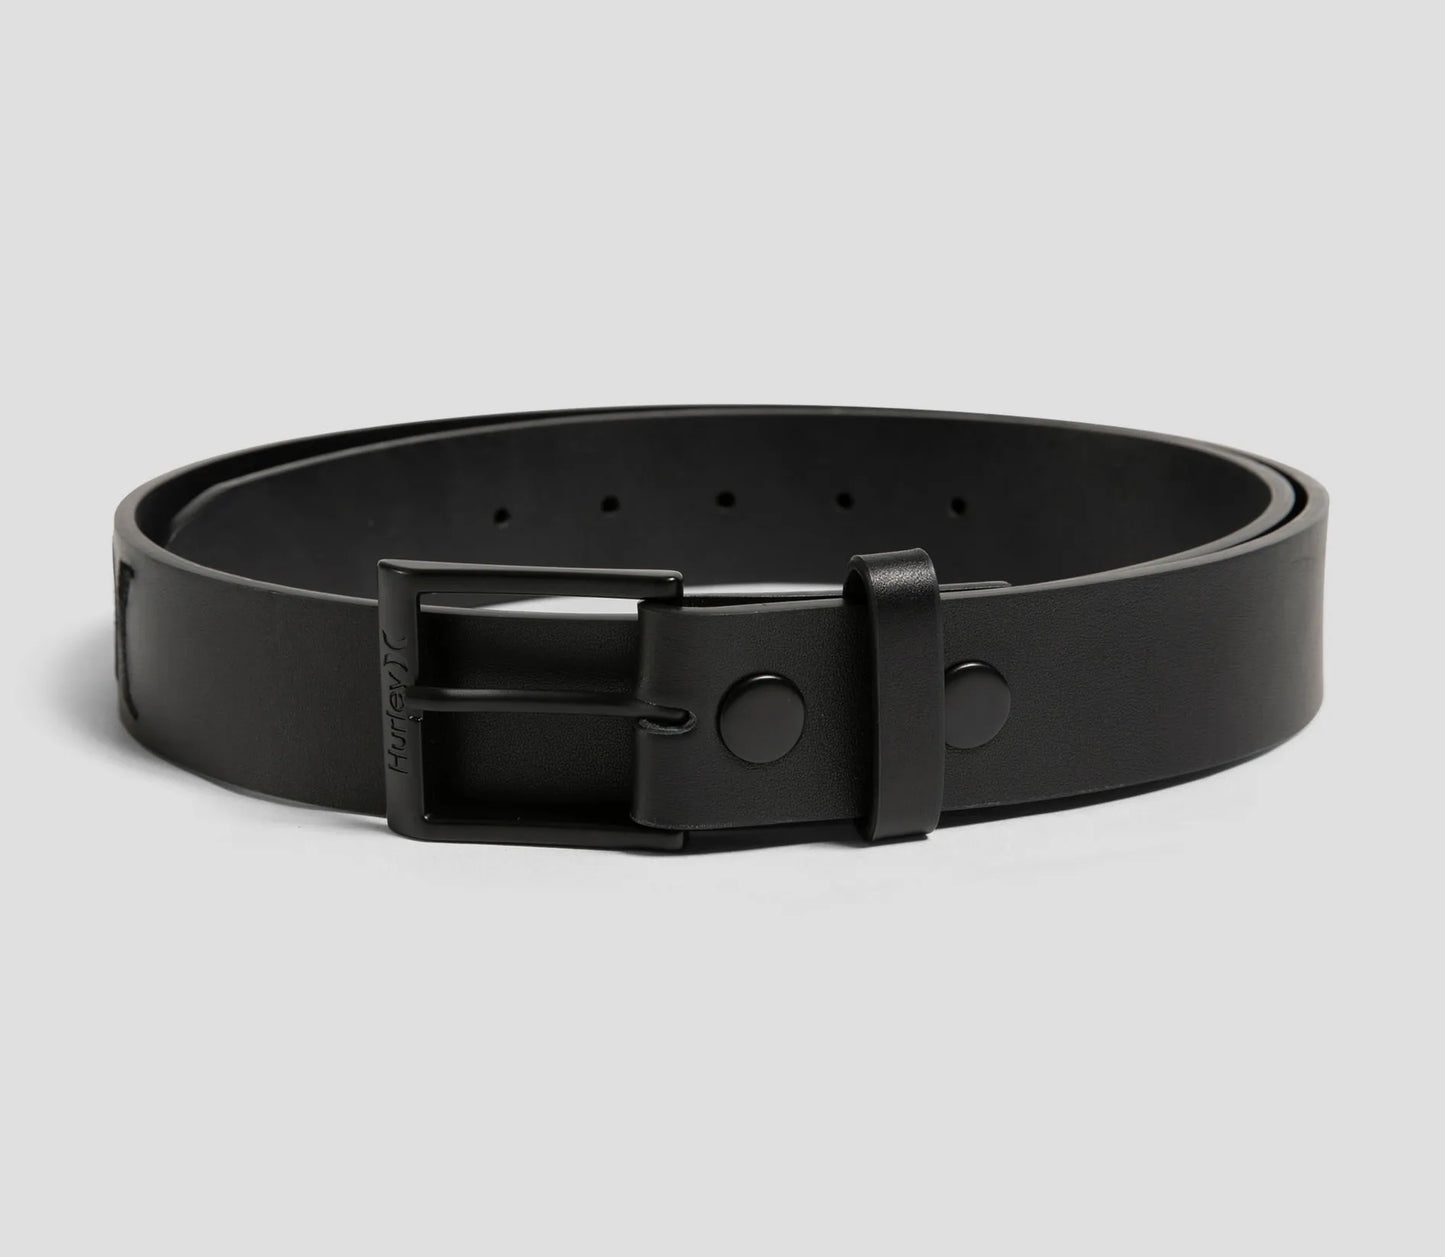 HURLEY ONE & ONLY LEATHER BELT